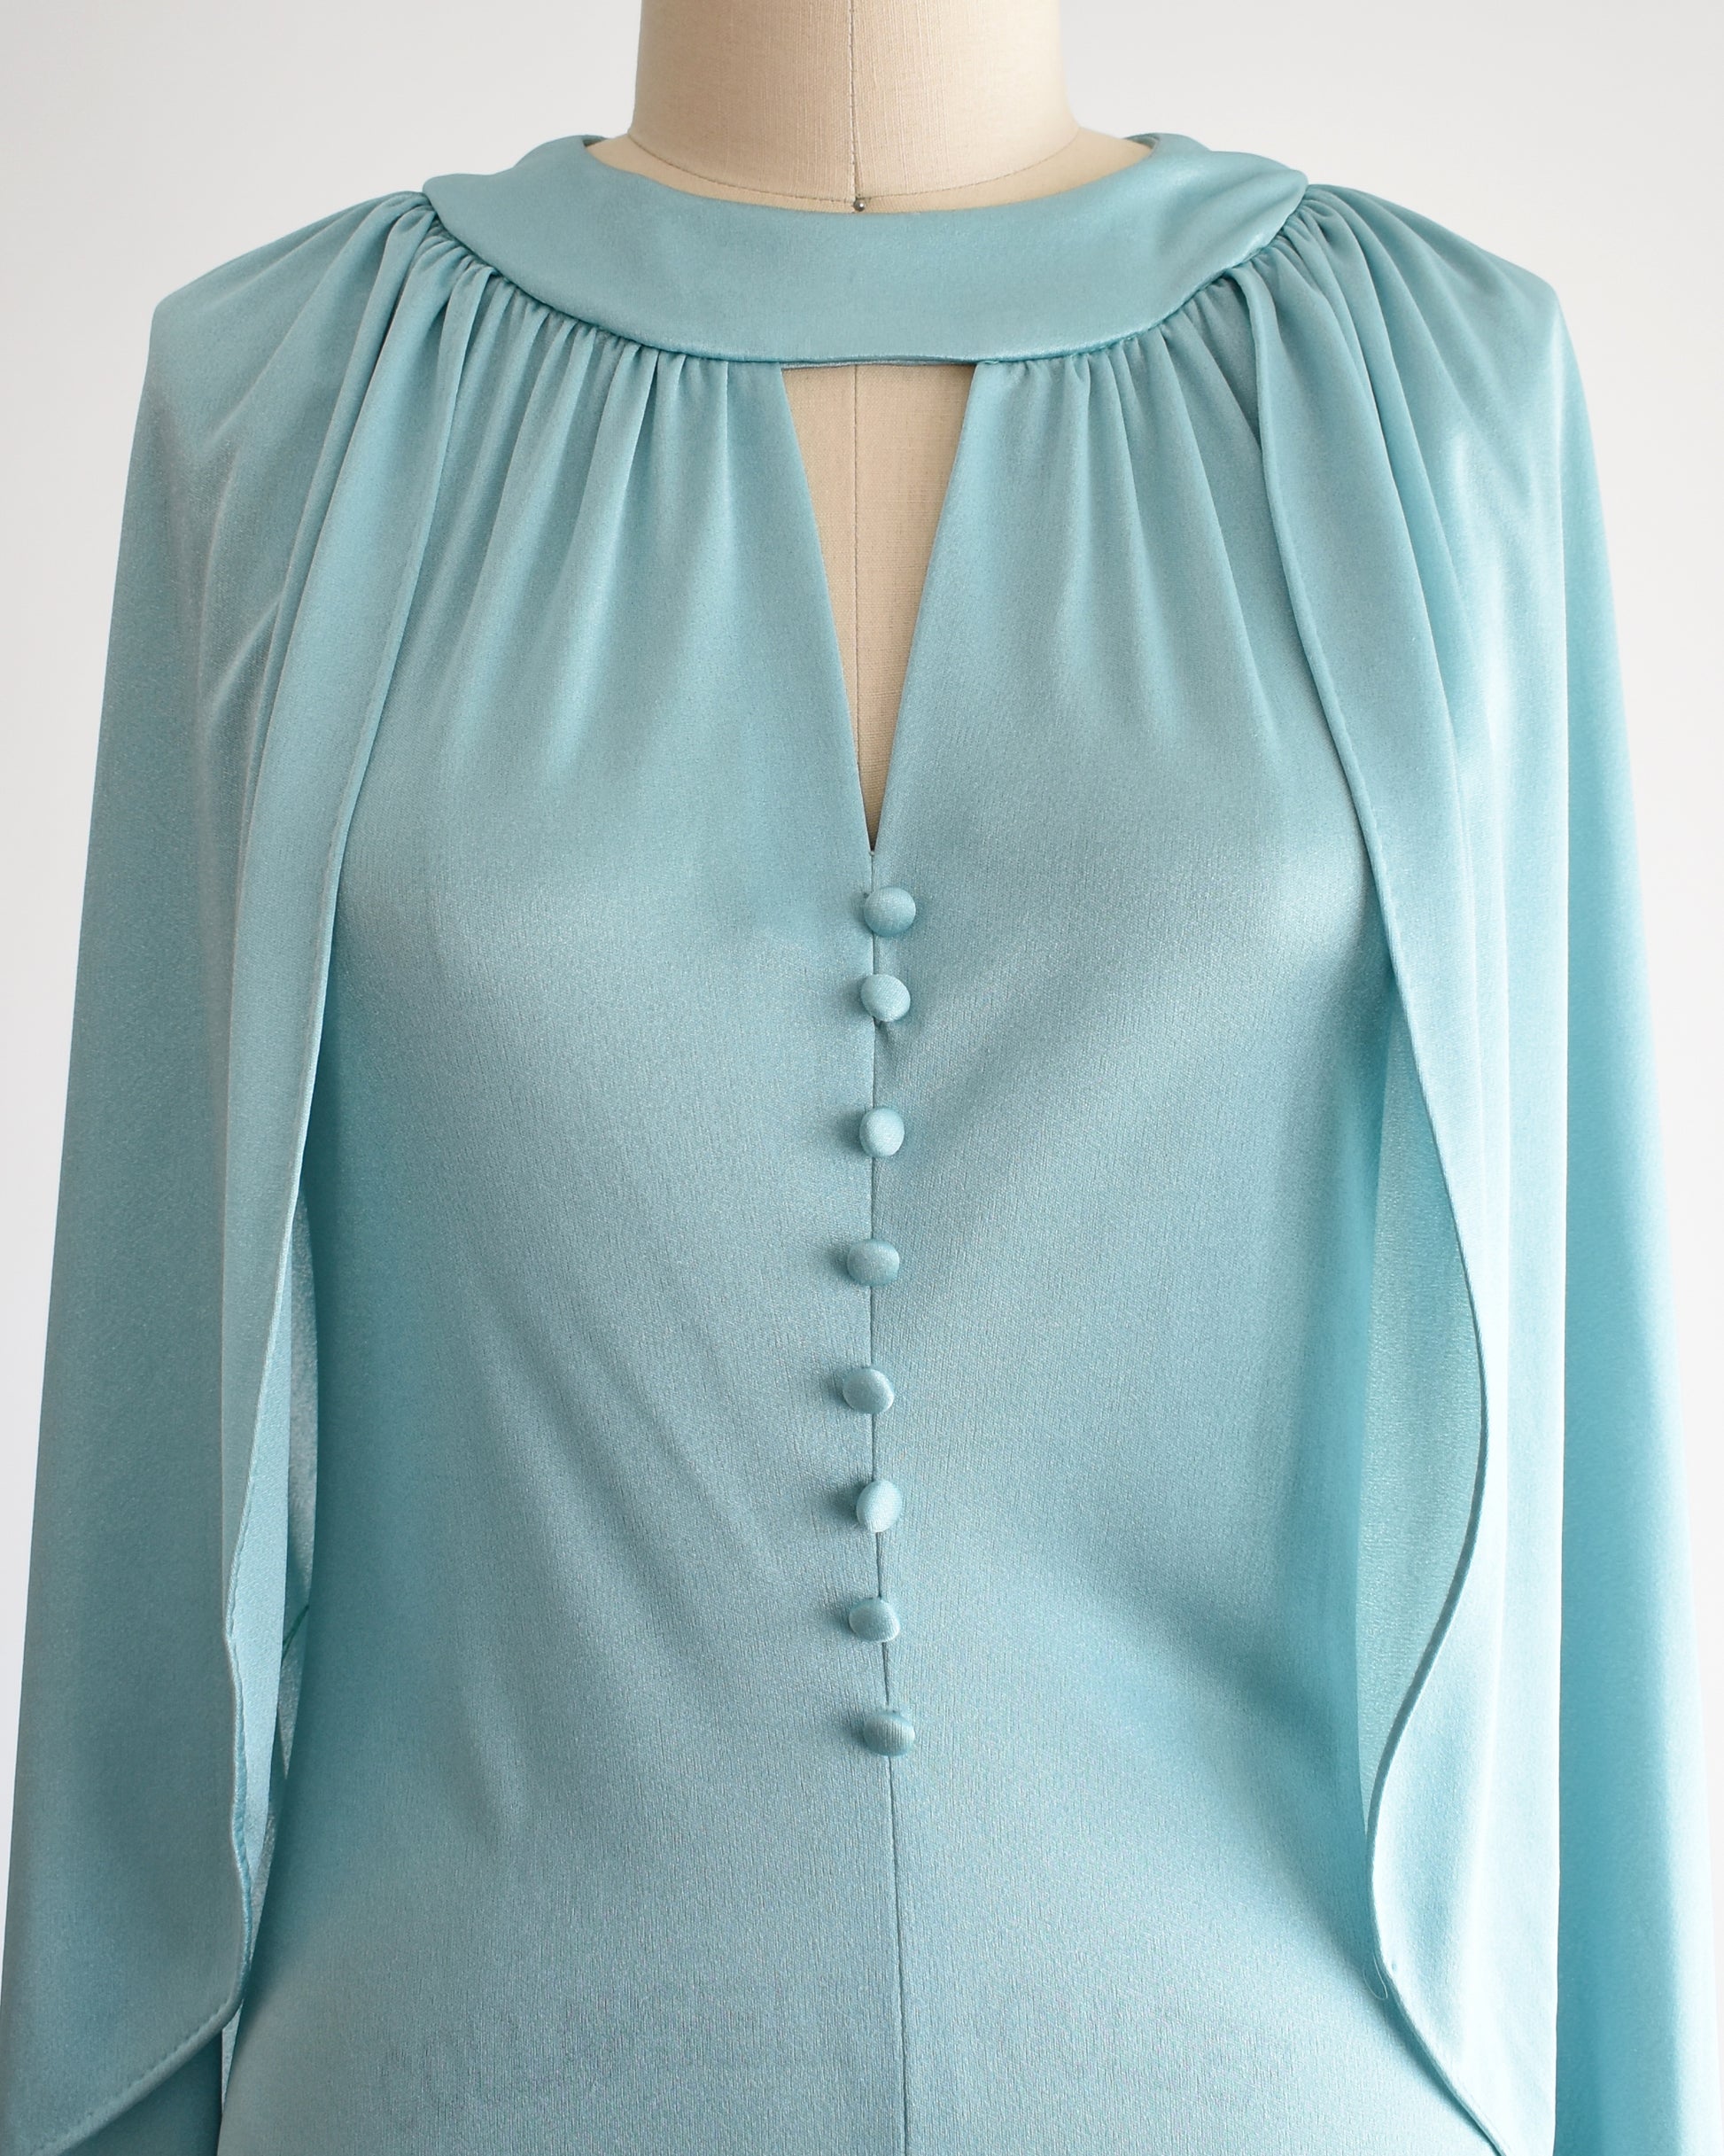 Close up of the bodice of a vintage 1970s seafoam blue caped maxi dress that has a triangle keyhole cutout and decorative buttons down the front